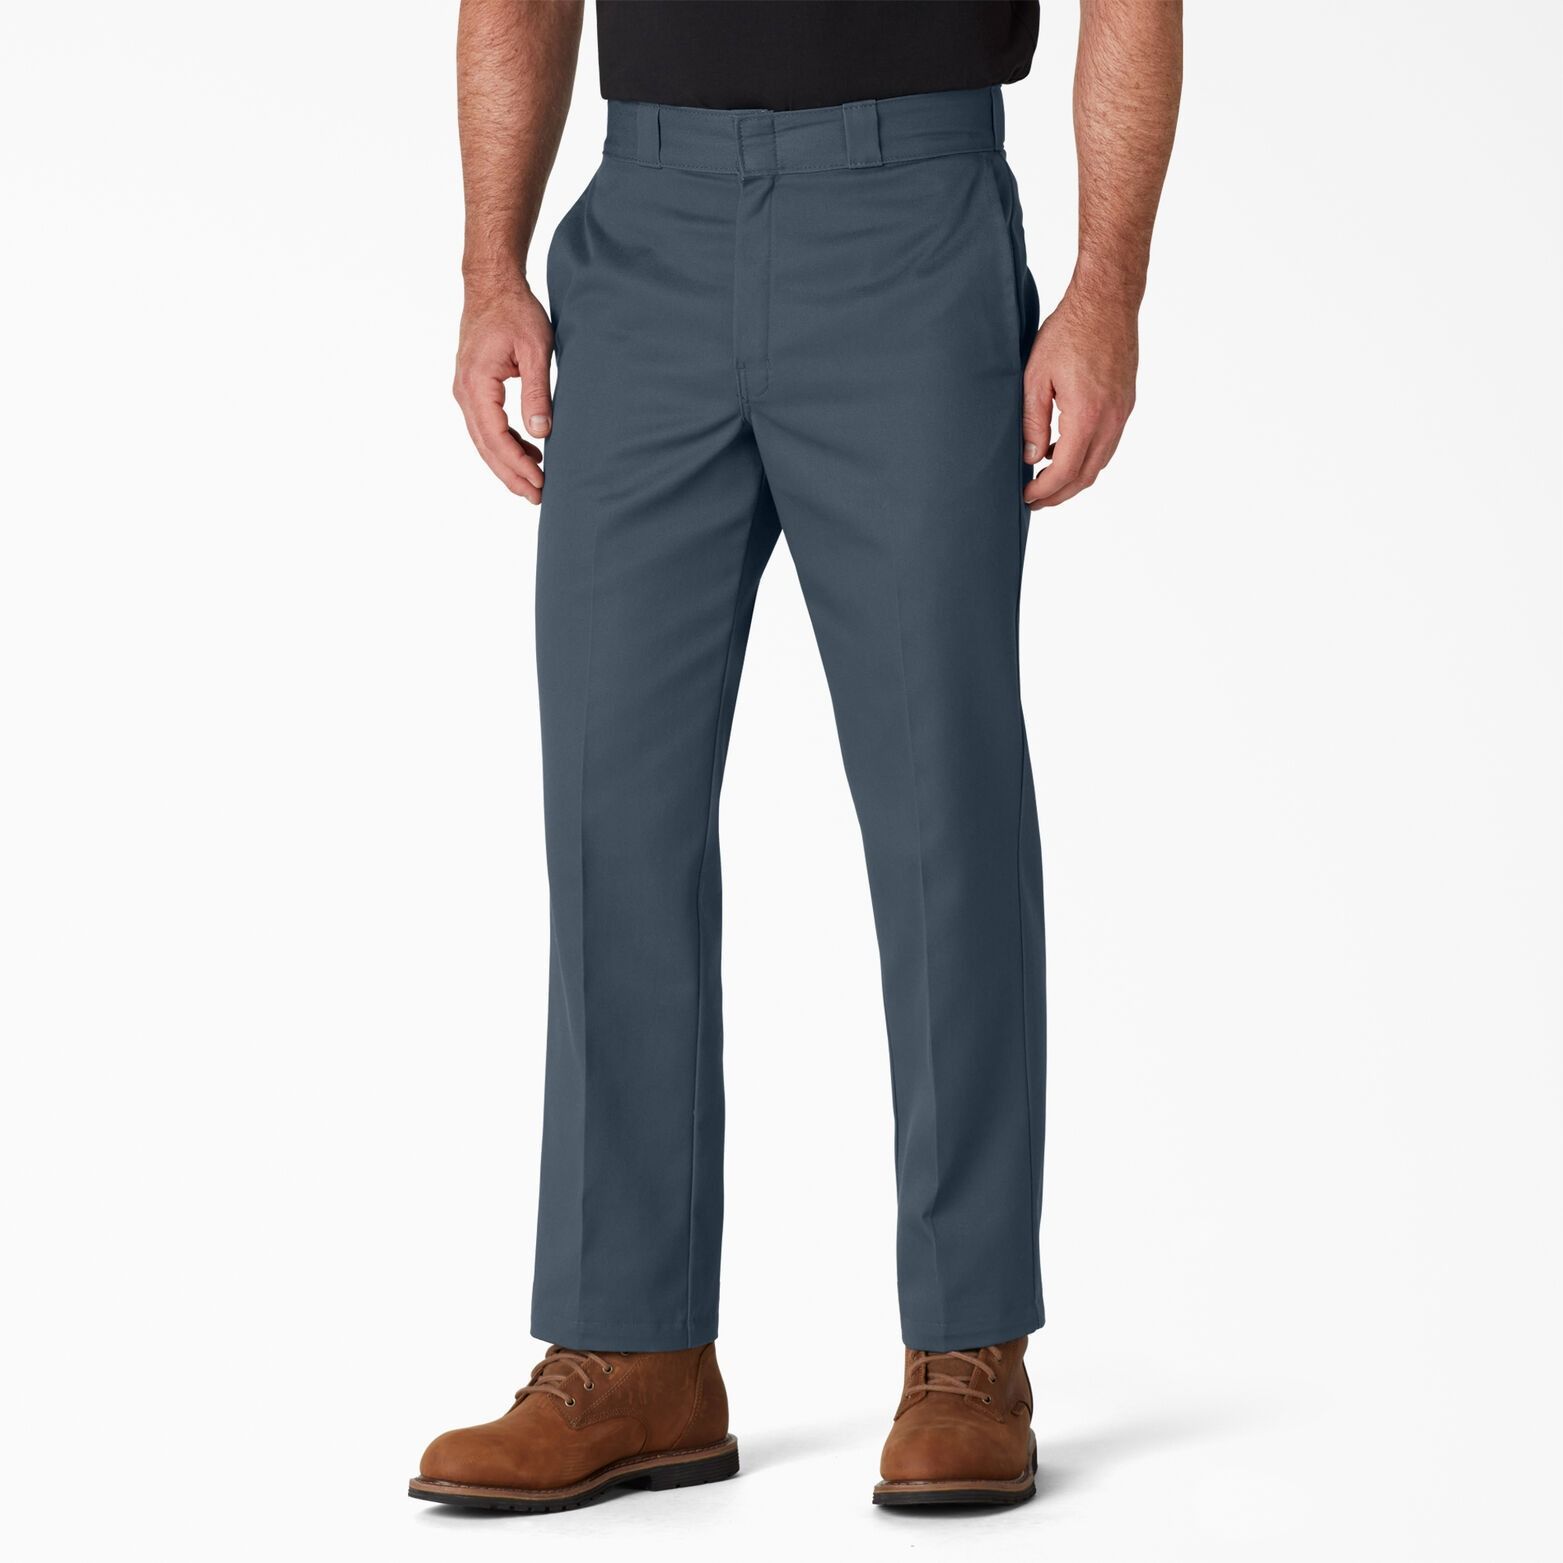 Mens black dress pants from business and casual to work and wedding